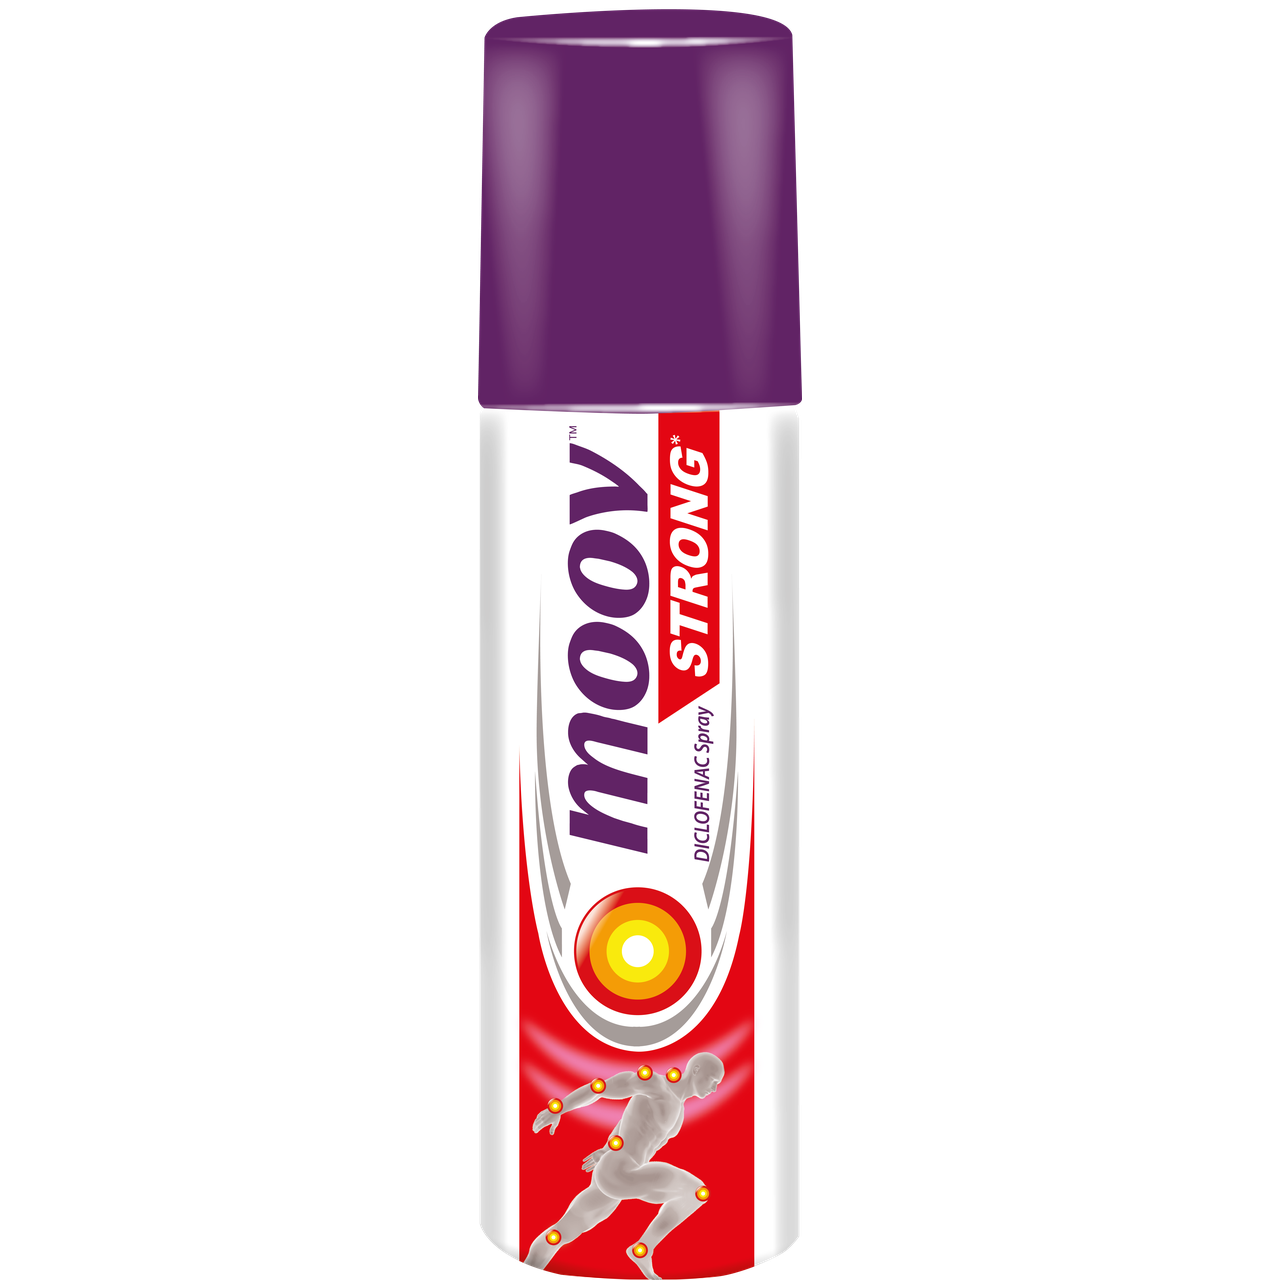 Moov STRONG Spray | Long Lasting Pain- Relieving Spray